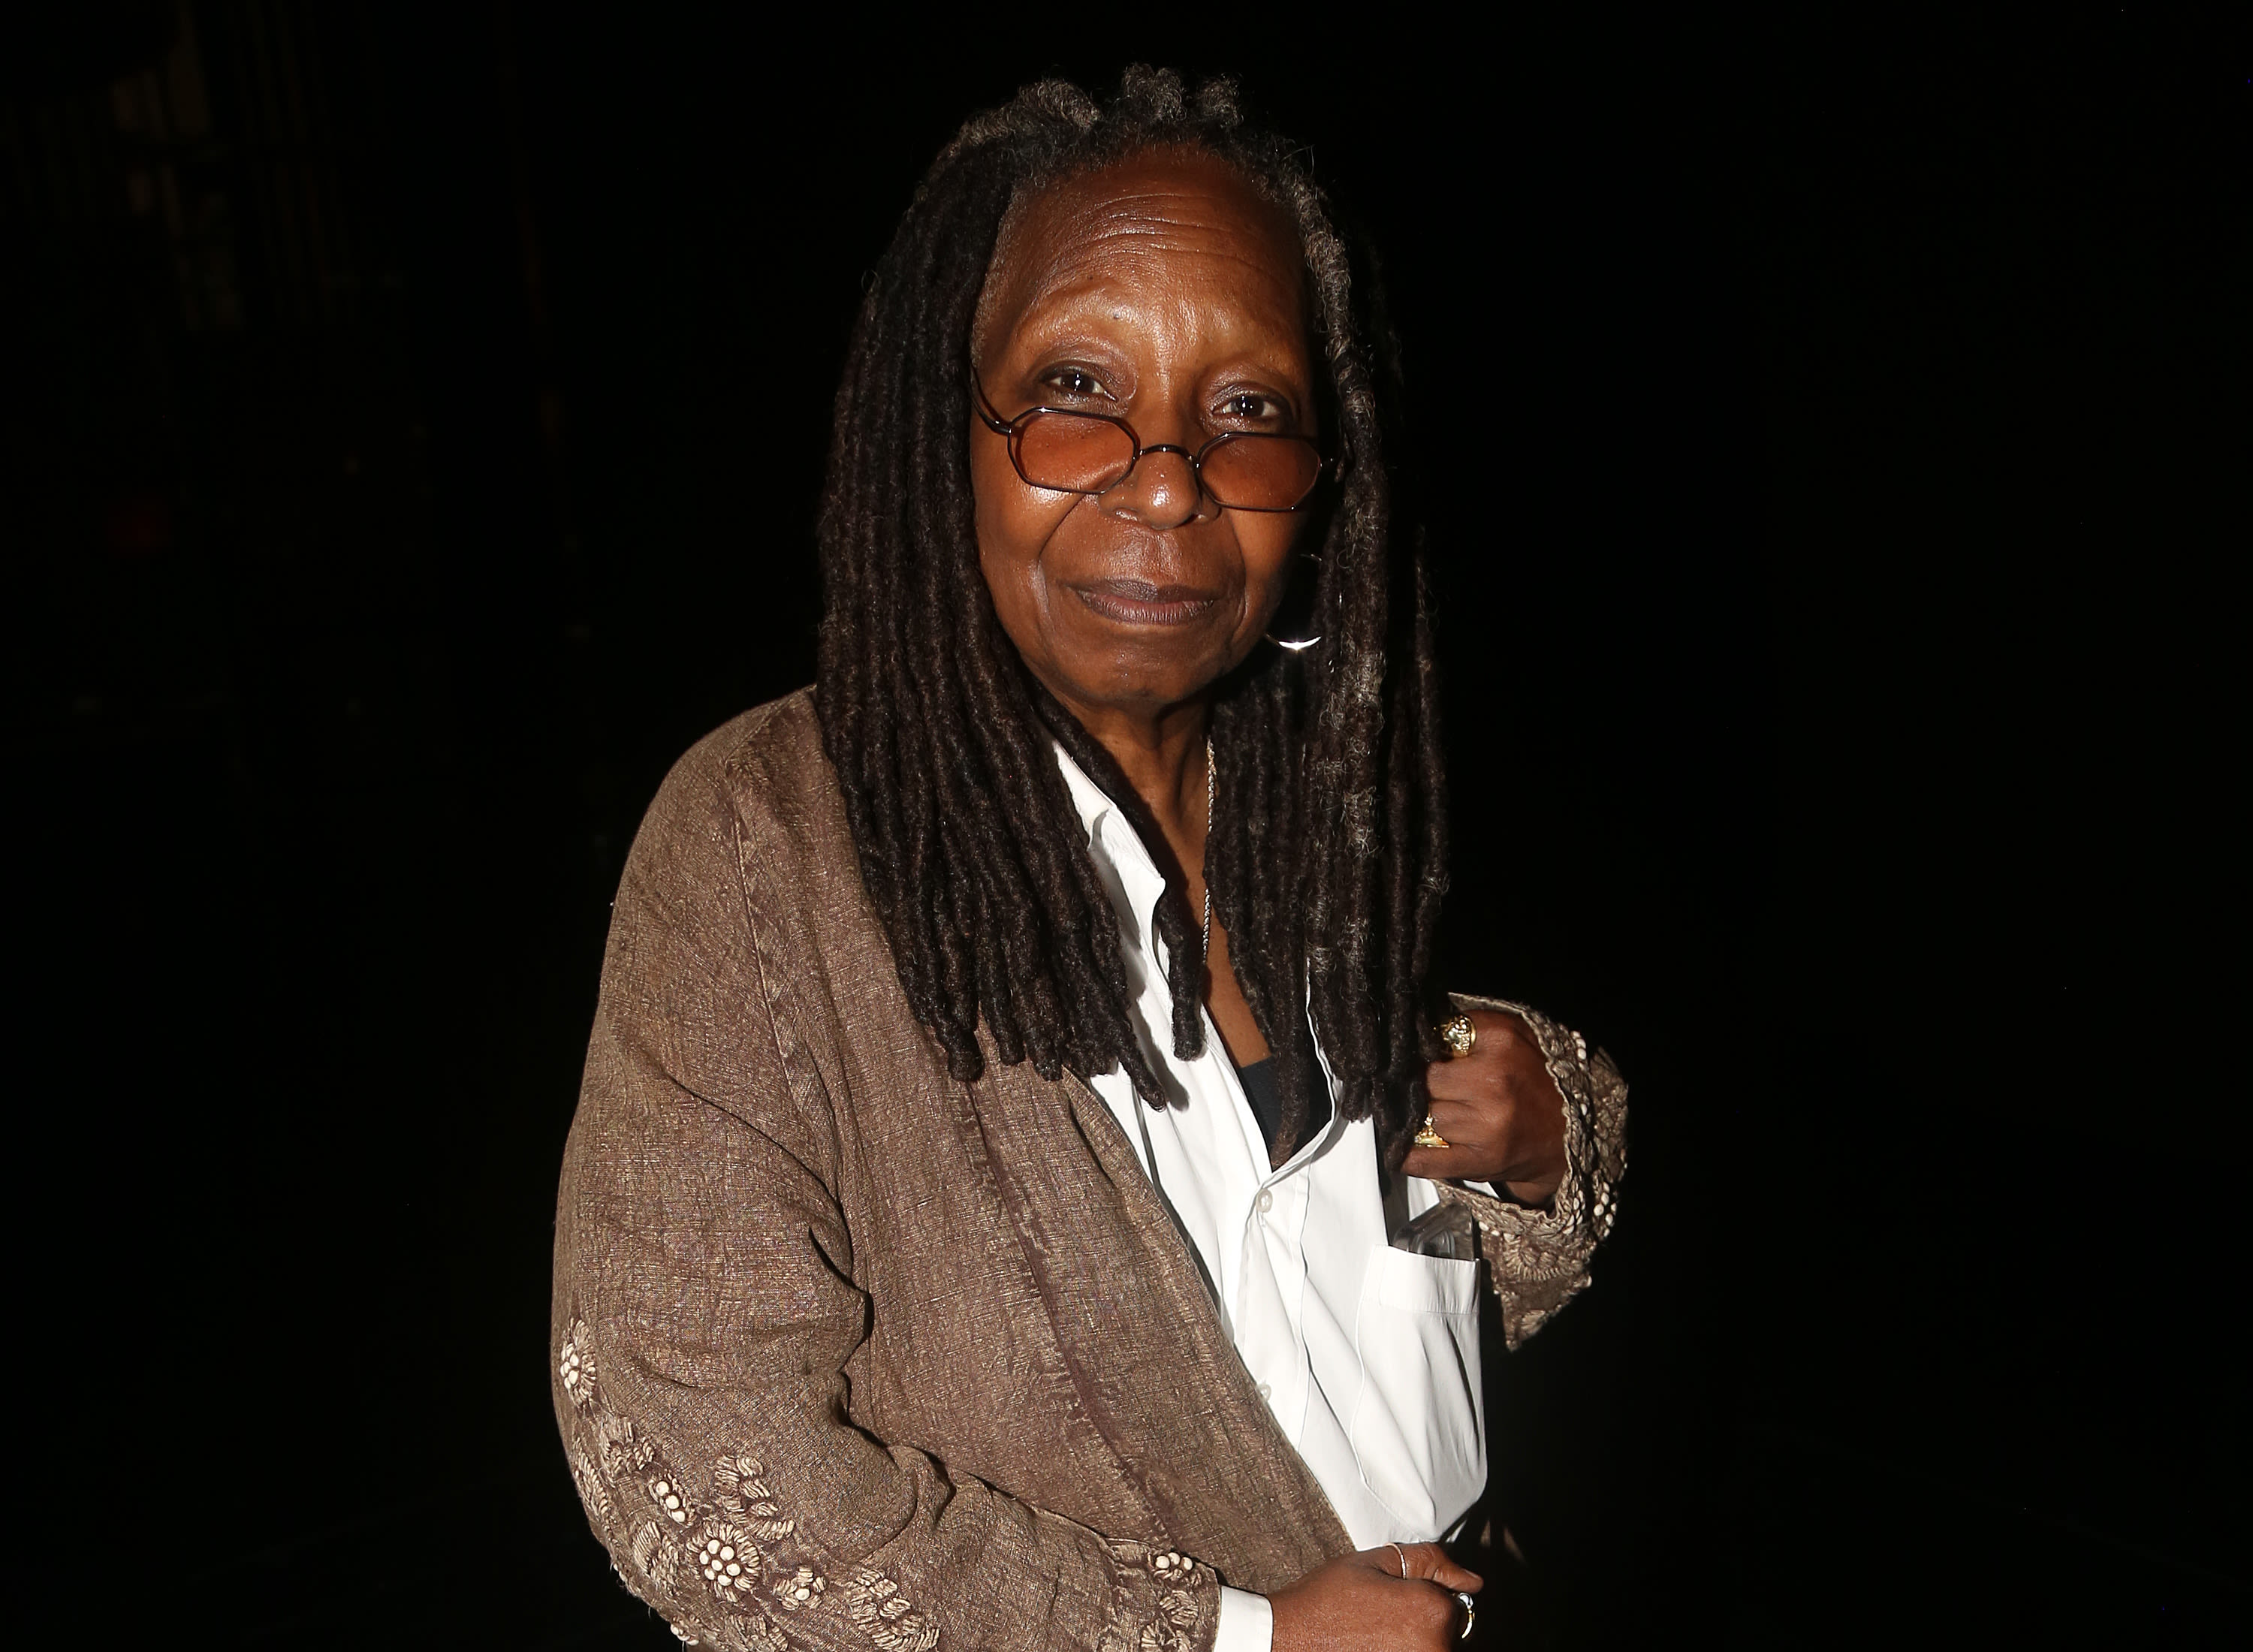 Whoopi Goldberg Teases ‘Sister Act 3’ Release After Fan Speculation: ‘It’s Coming’